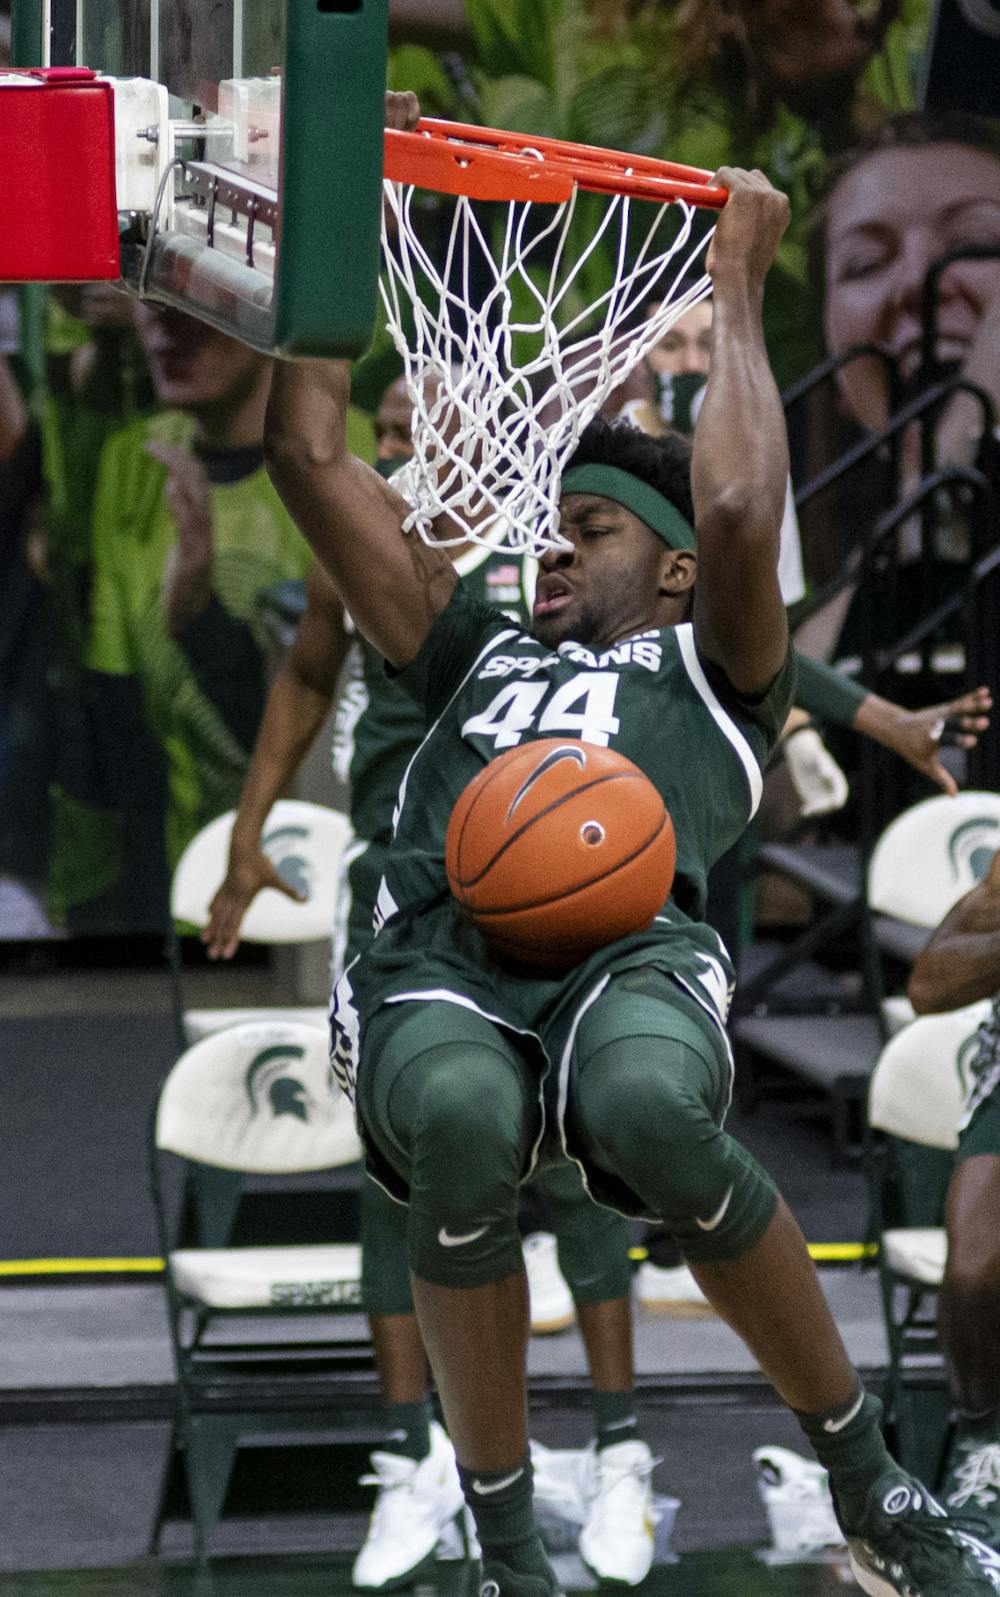 Junior forward Gabe Brown (44) dunks on Oakland's basket during the second half. The Spartans came back after the first half to pull out a 109-91 win on Dec. 13, 2020.